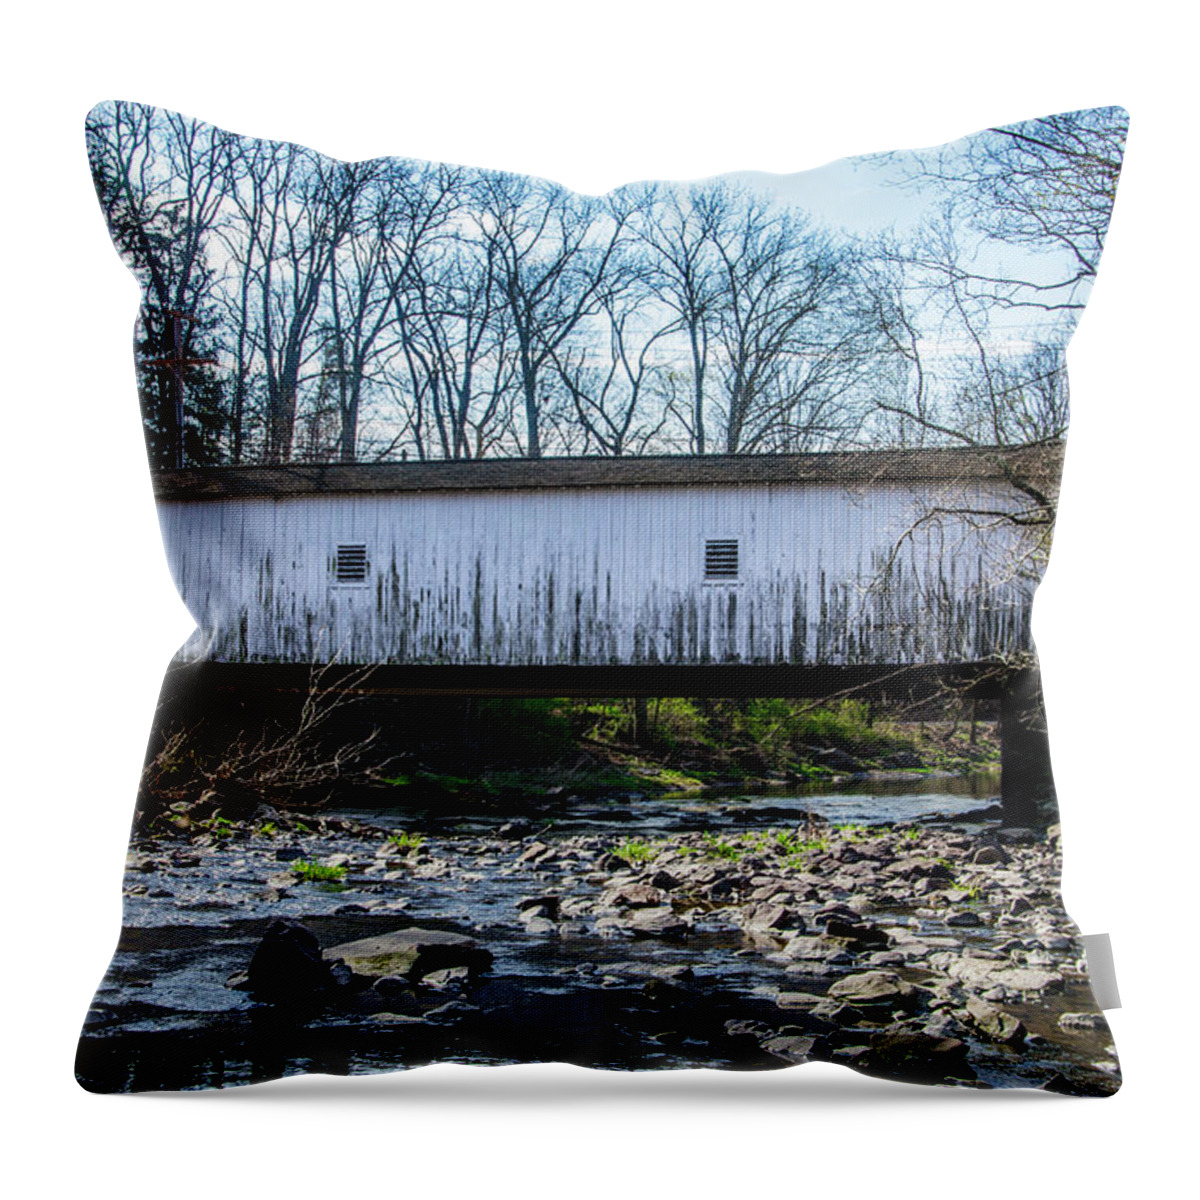 Green Throw Pillow featuring the photograph Green Sergeants Bridge by Bill Cannon